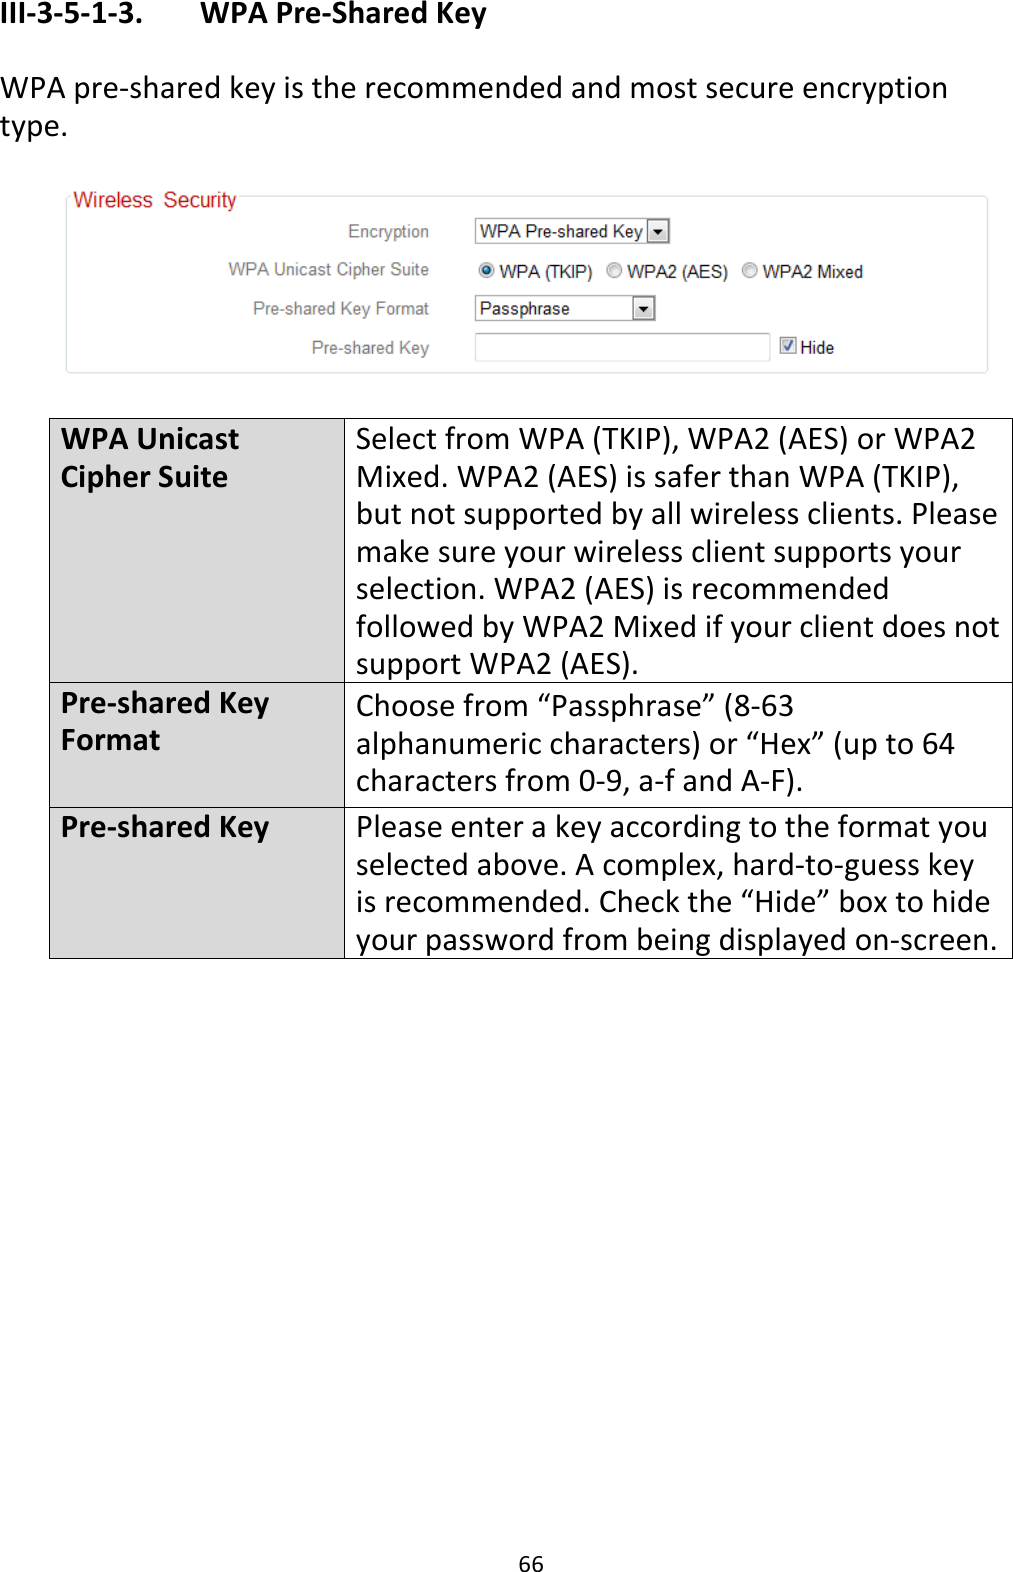 66 III-3-5-1-3.    WPA Pre-Shared Key  WPA pre-shared key is the recommended and most secure encryption type.    WPA Unicast Cipher Suite Select from WPA (TKIP), WPA2 (AES) or WPA2 Mixed. WPA2 (AES) is safer than WPA (TKIP), but not supported by all wireless clients. Please make sure your wireless client supports your selection. WPA2 (AES) is recommended followed by WPA2 Mixed if your client does not support WPA2 (AES). Pre-shared Key Format Choose from “Passphrase” (8-63 alphanumeric characters) or “Hex” (up to 64 characters from 0-9, a-f and A-F).   Pre-shared Key Please enter a key according to the format you selected above. A complex, hard-to-guess key is recommended. Check the “Hide” box to hide your password from being displayed on-screen.  